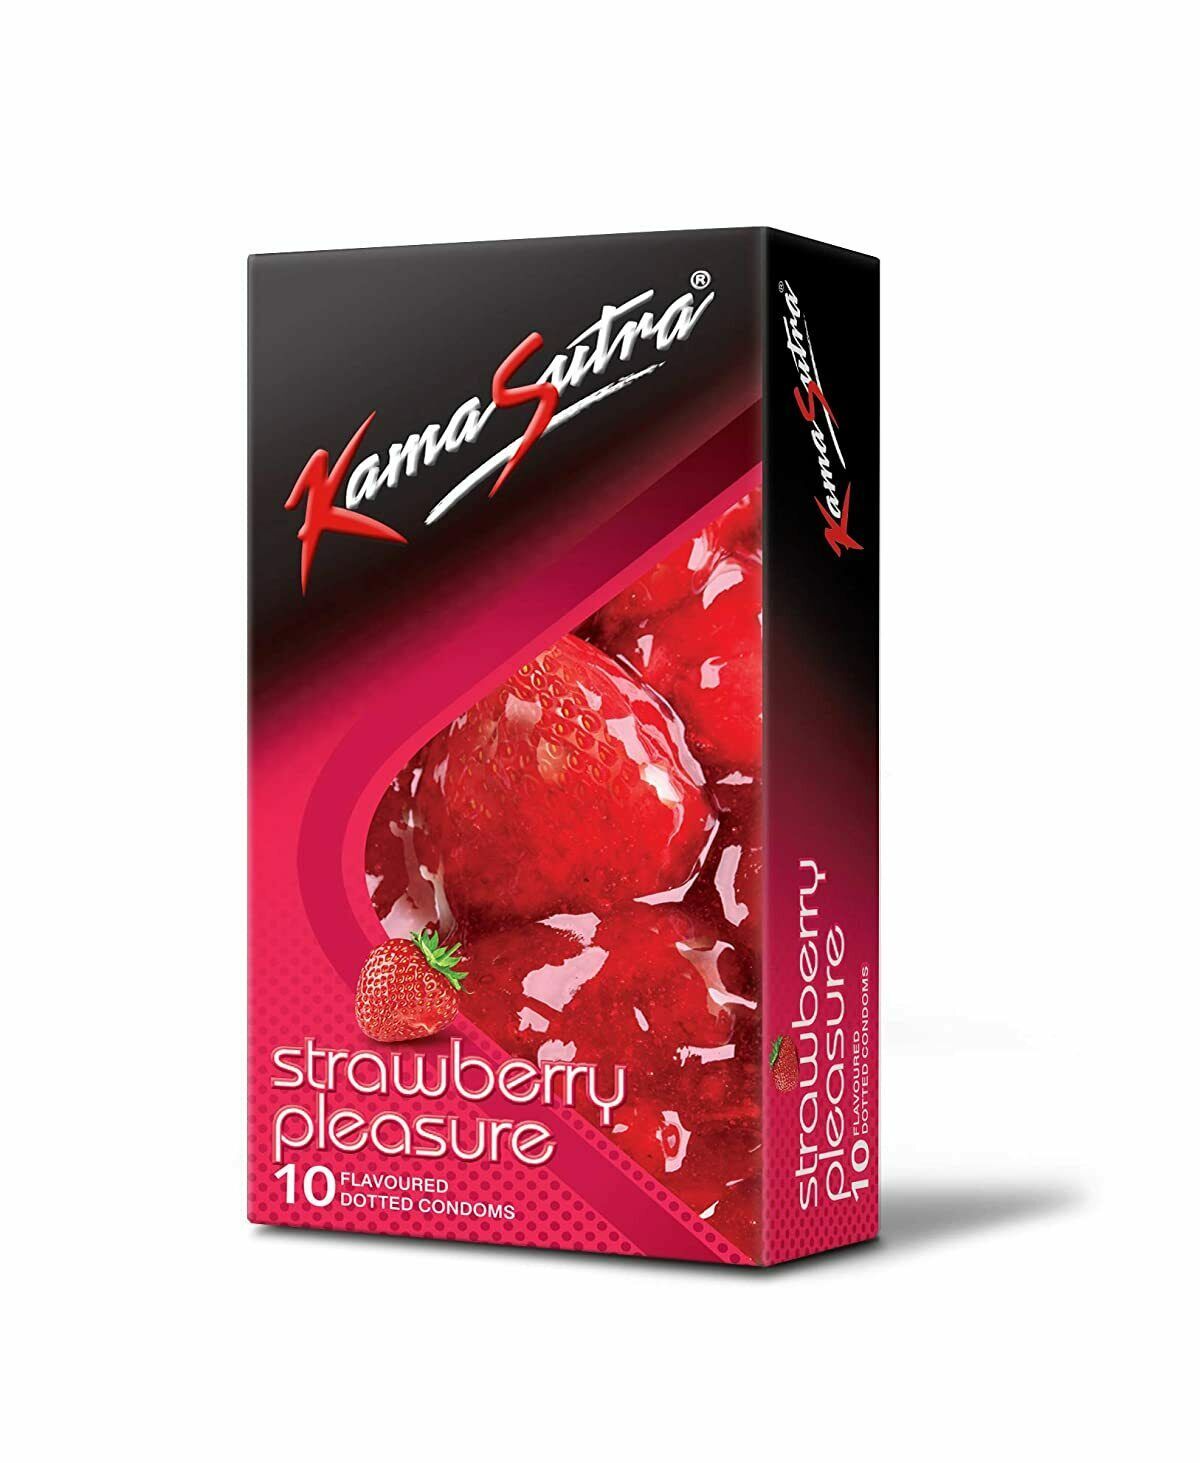 KamaSutra Strawberry Pleasure Flavoured Condoms - 10 Count (Pack of 1)